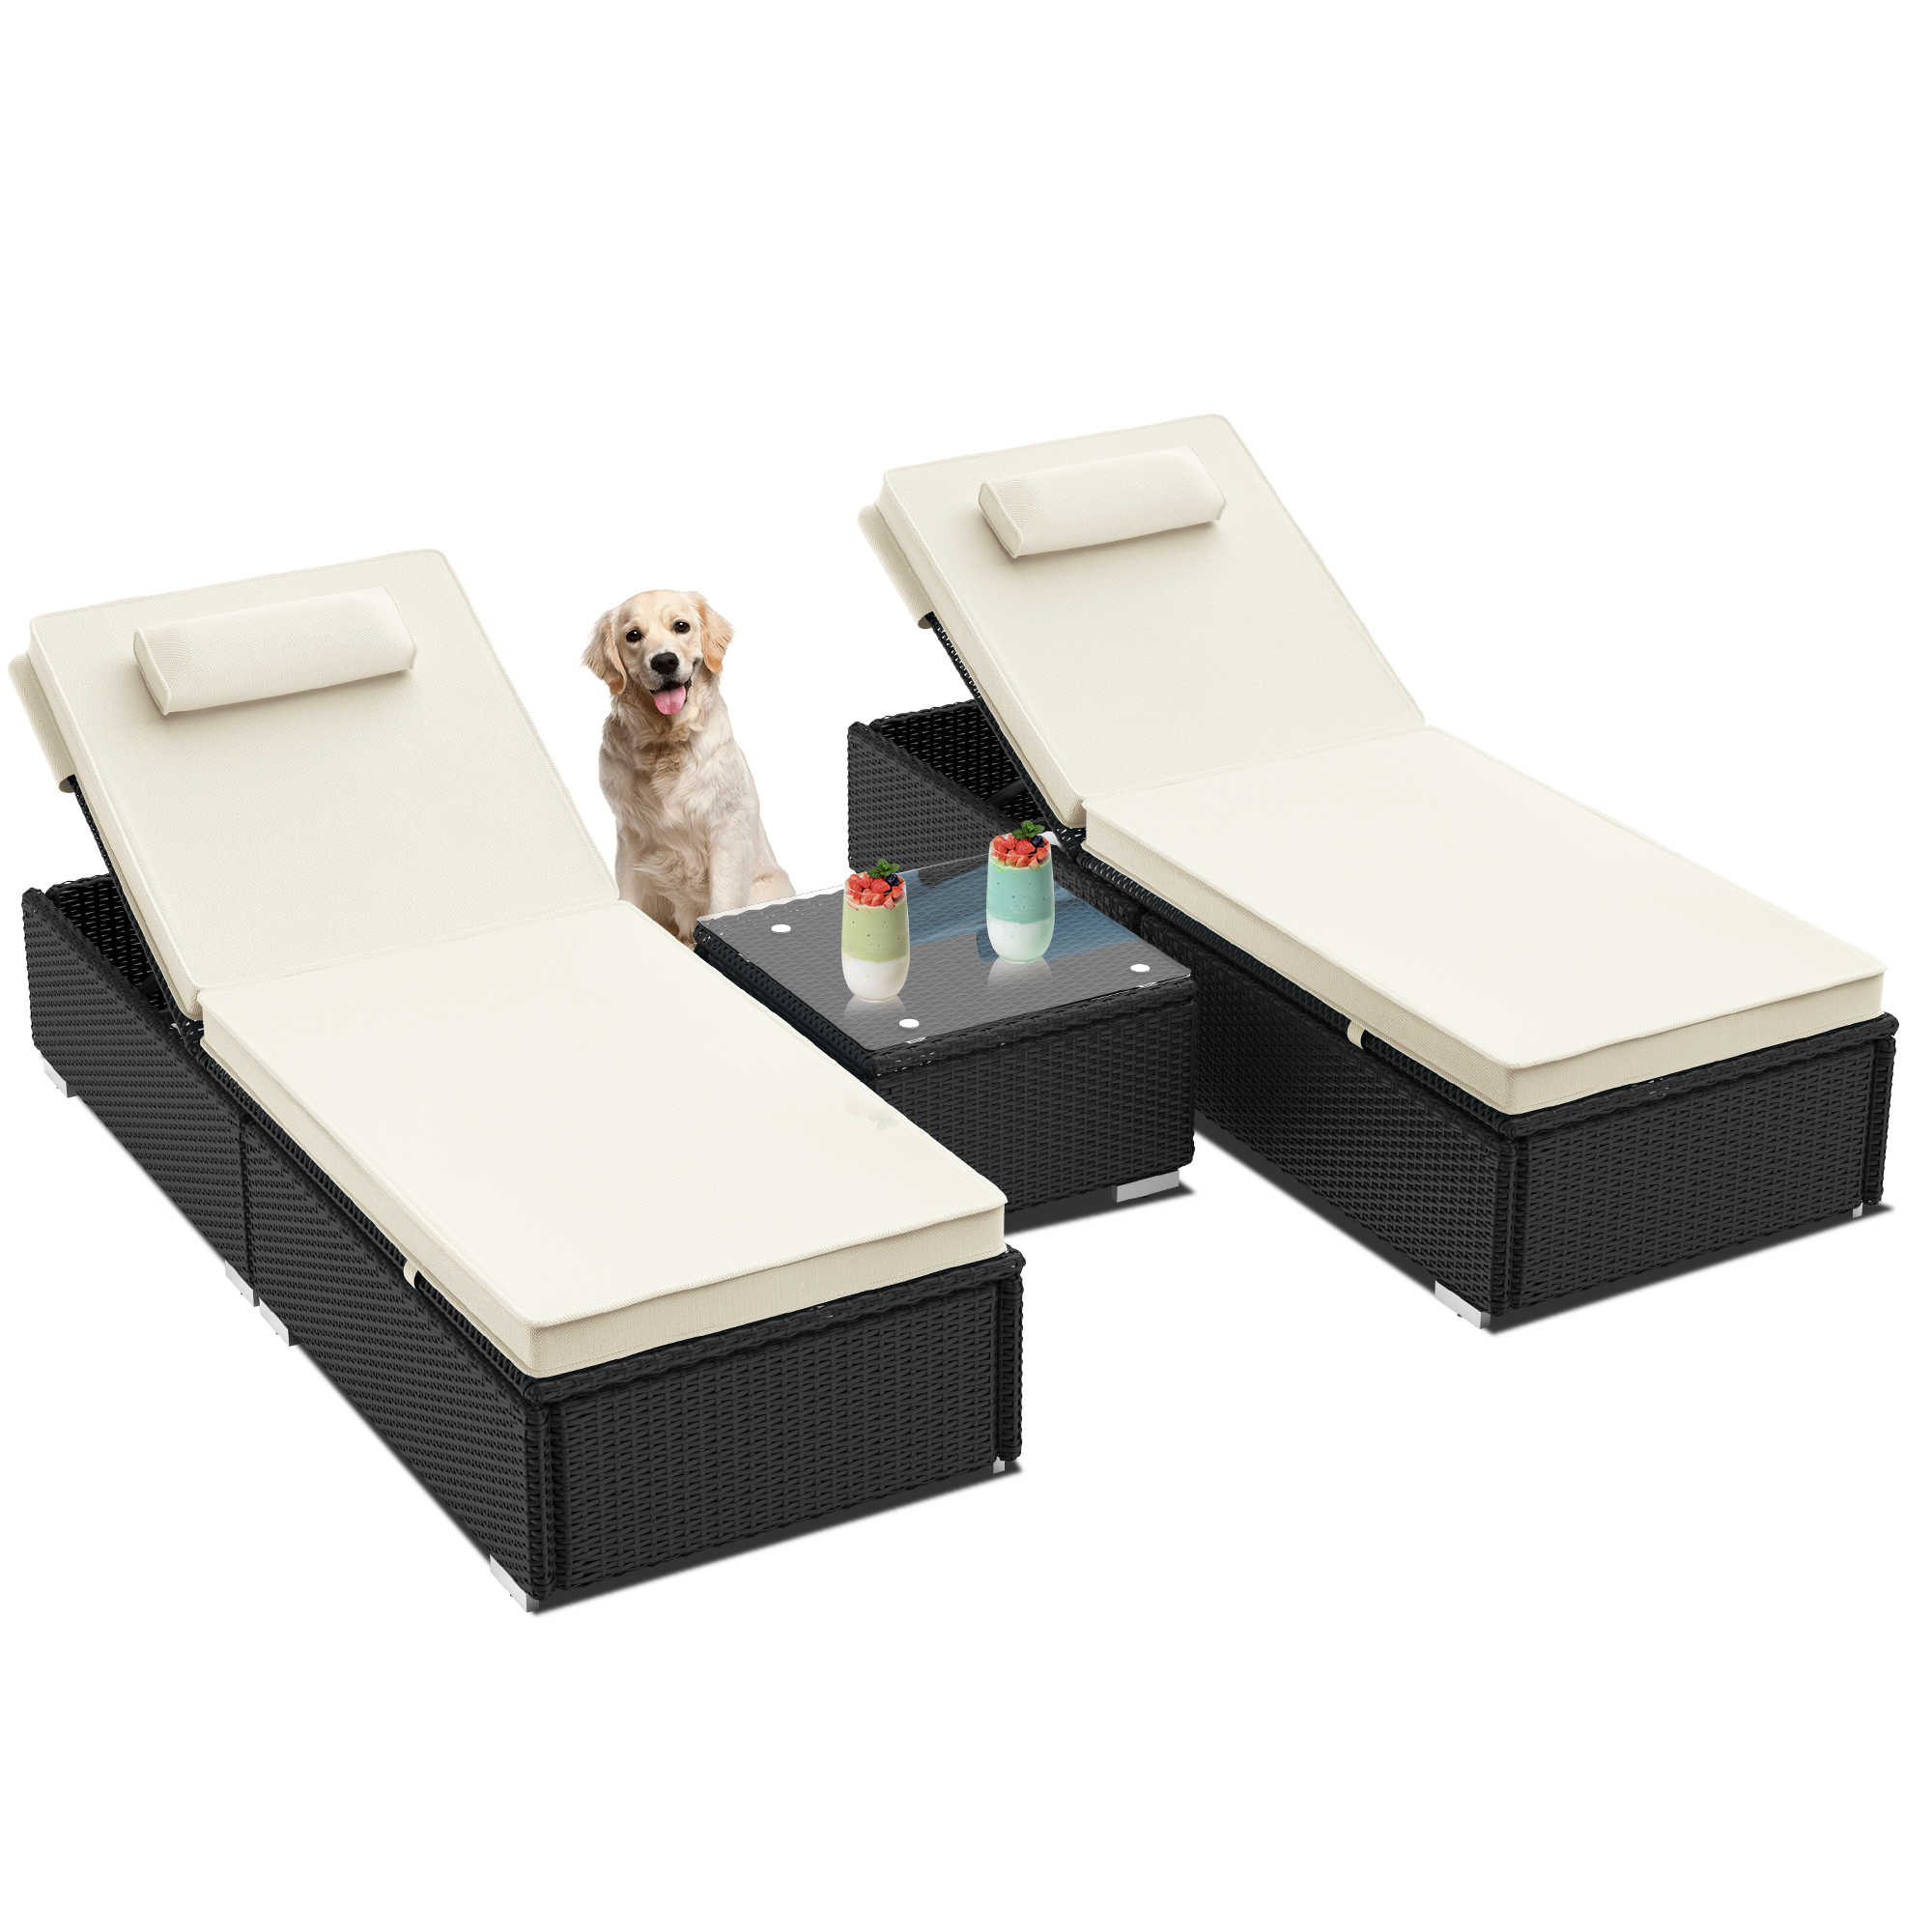 Sesslife Lounge Chairs for Outdoor Outside Lounge Chairs Set of 2, Adjustable PE Rattan Wicker Patio Pool Lounge Chair with Cushion and Side Table, for Poolside Backyard Deck Porch Garden, Beige - image 3 of 7